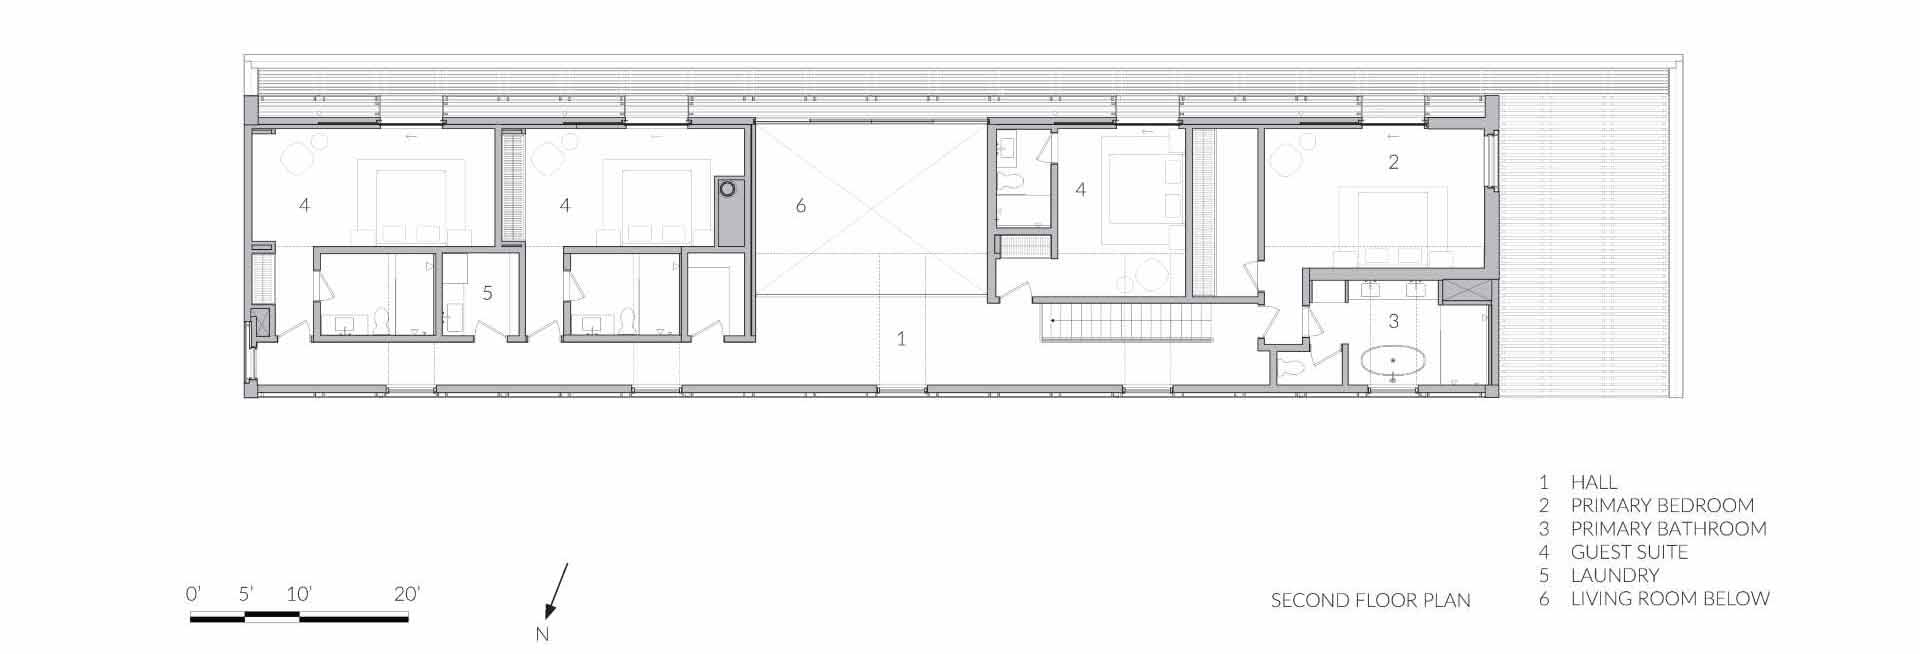 Architectural drawings for a home clad in weathered reclaimed wood.